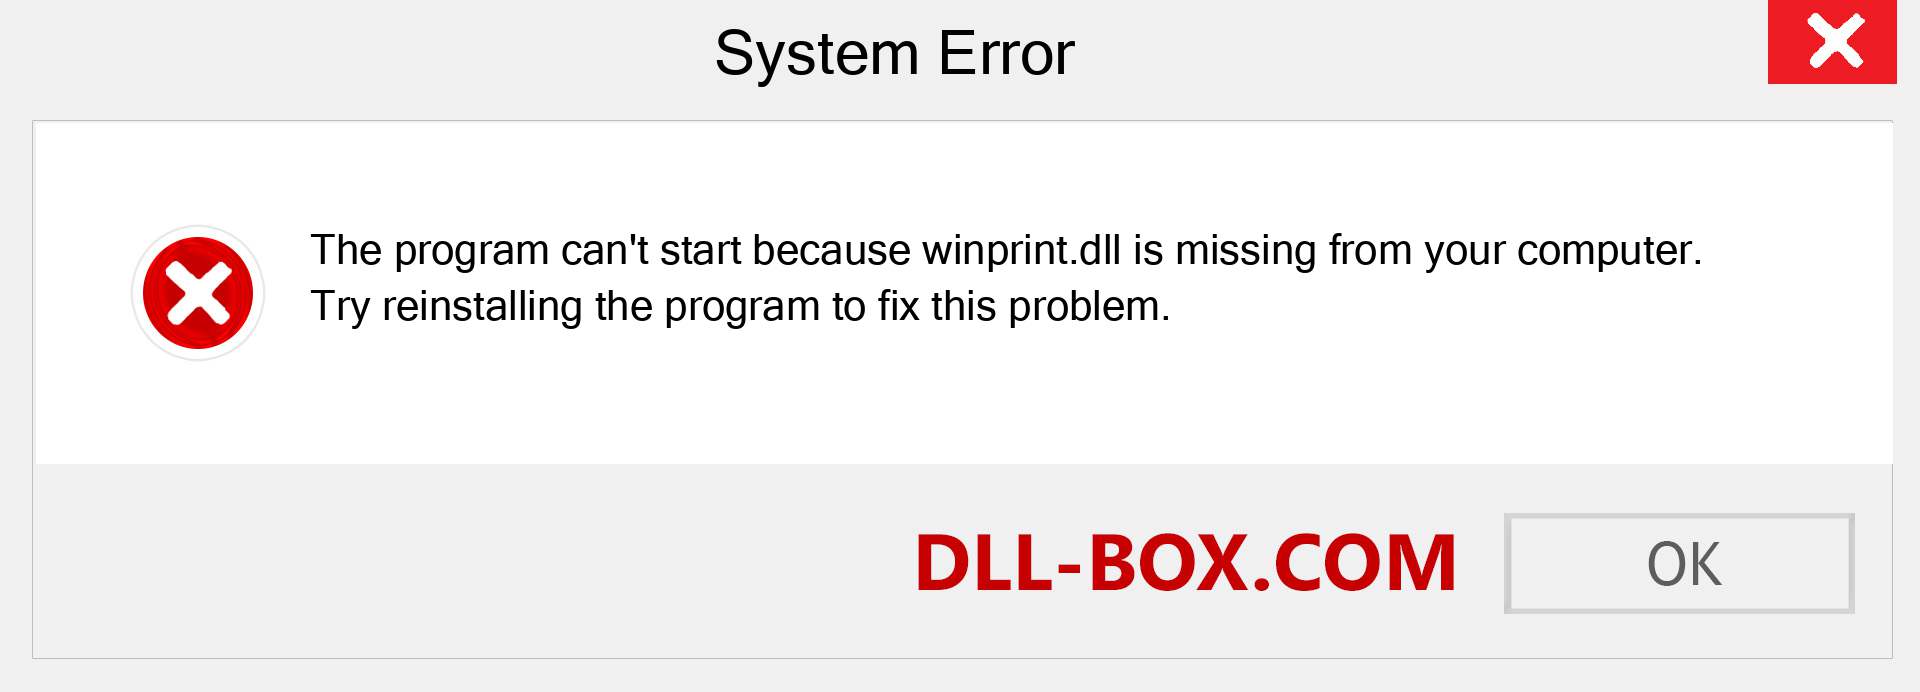  winprint.dll file is missing?. Download for Windows 7, 8, 10 - Fix  winprint dll Missing Error on Windows, photos, images